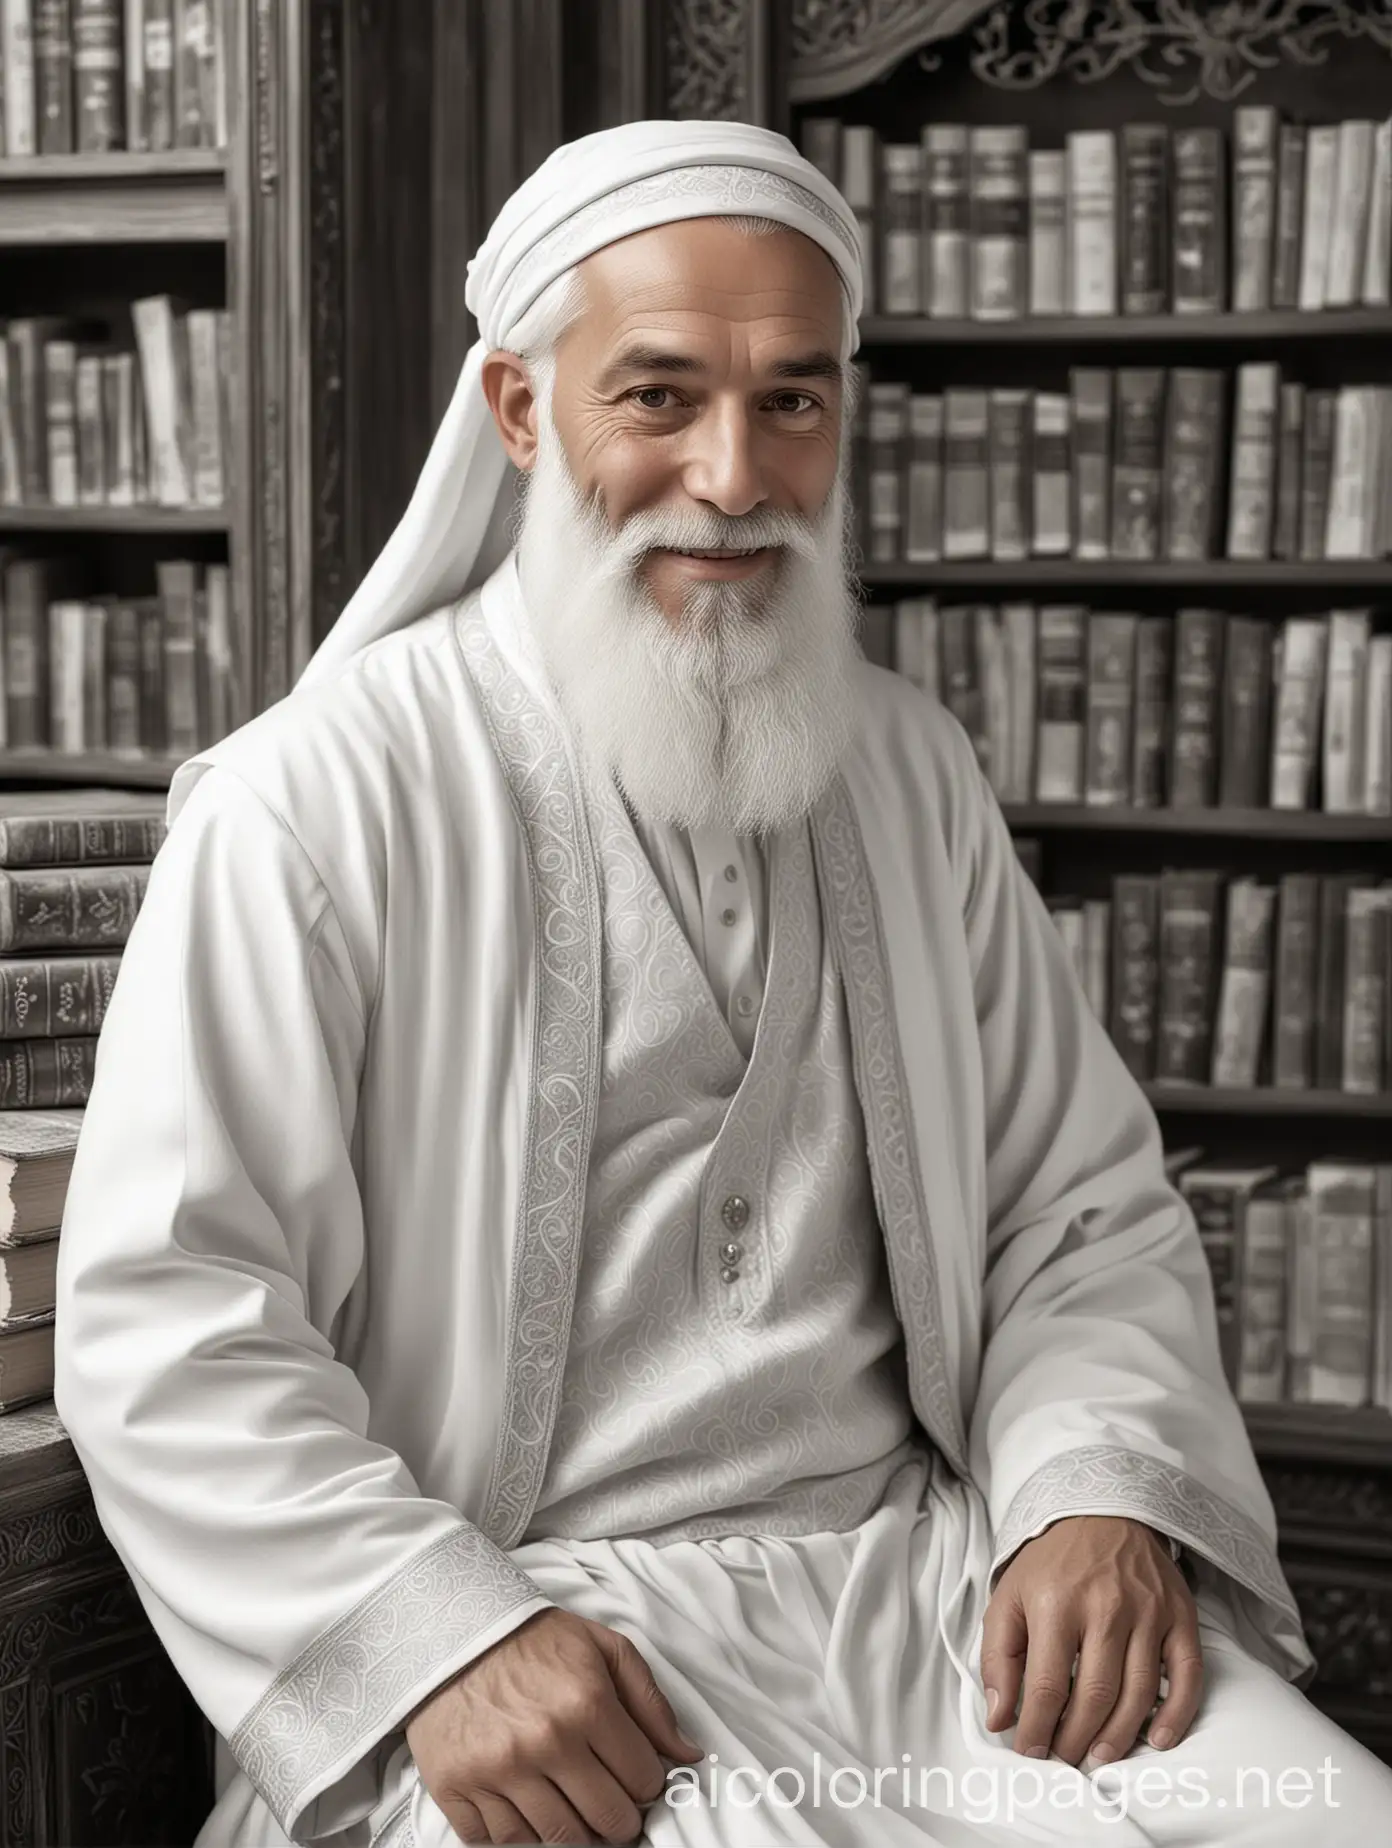 A wise middle-aged man from the Islamic era, with white skin and a long thick white beard, staring at the lens, smiling lightly, sitting in an old library, dressed in beautiful white clothes, very realistic, 4K, vintage, so that the whole body is visible. , Coloring Page, black and white, line art, white background, Simplicity, Ample White Space. The background of the coloring page is plain white to make it easy for young children to color within the lines. The outlines of all the subjects are easy to distinguish, making it simple for kids to color without too much difficulty